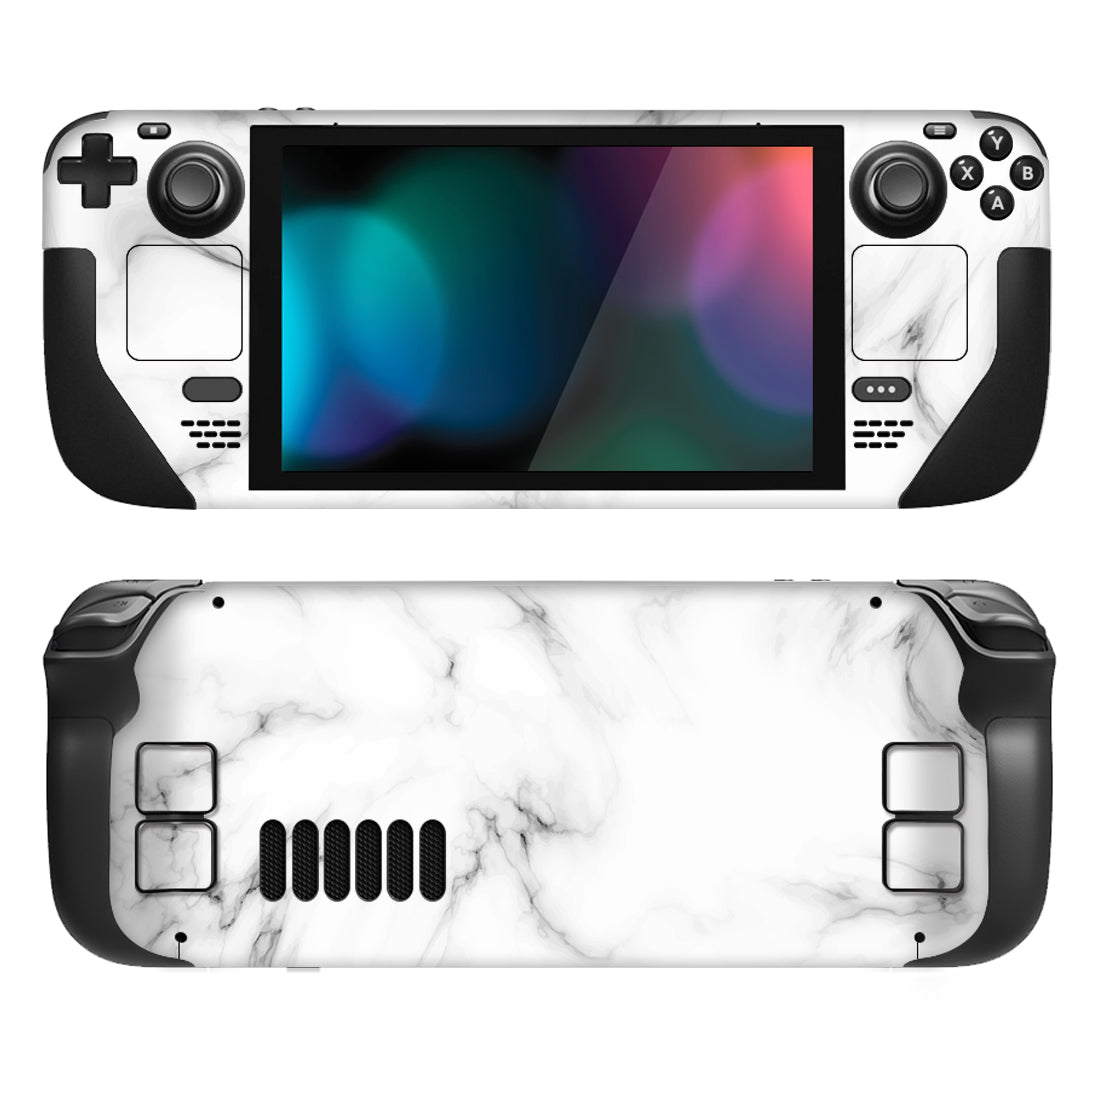 PlayVital Full Set Protective Skin Decal for Steam Deck, Custom Stickers Vinyl Cover for Steam Deck Handheld Gaming PC - Seamless White Marble - SDTM034 playvital